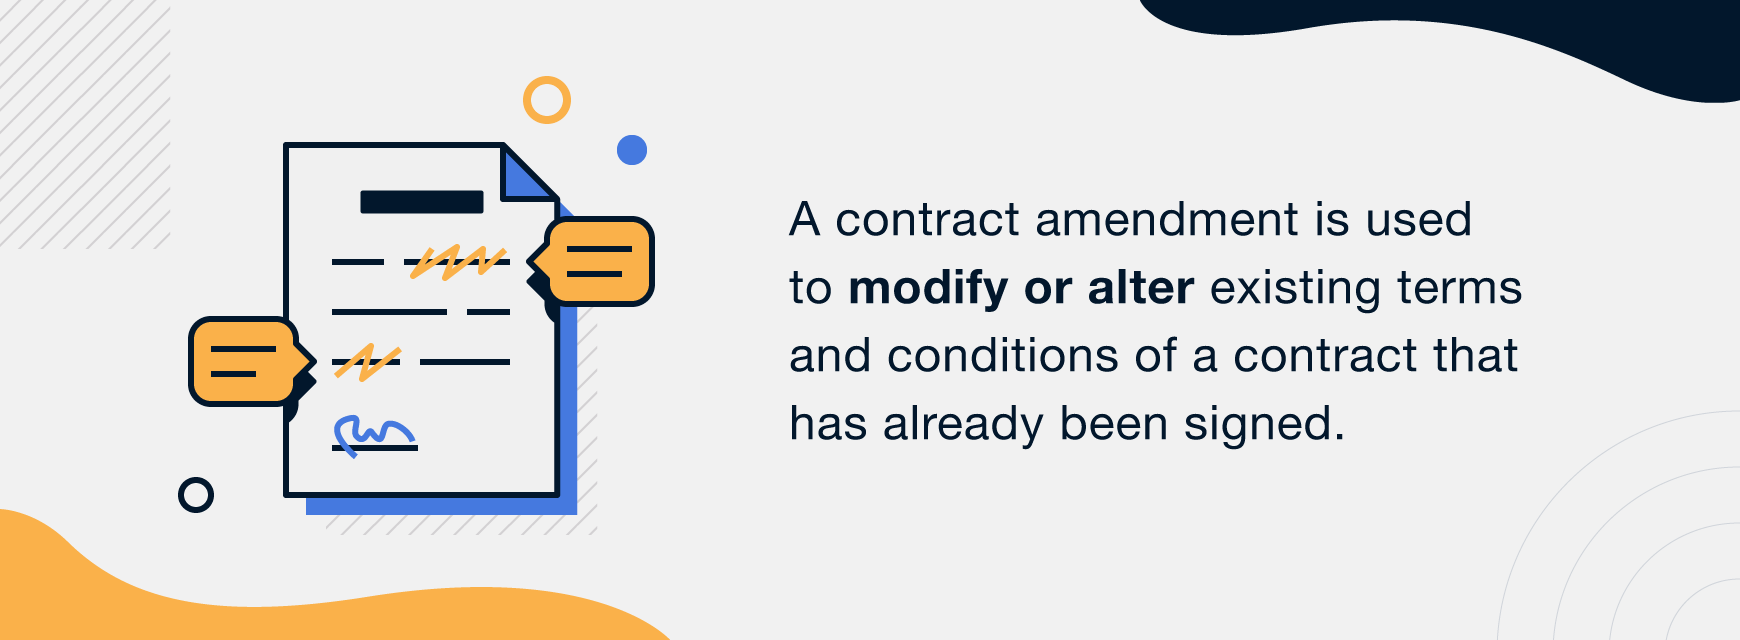 A contract amendment is used to modify or alter existing terms and conditions of a contract that has already been signed. 